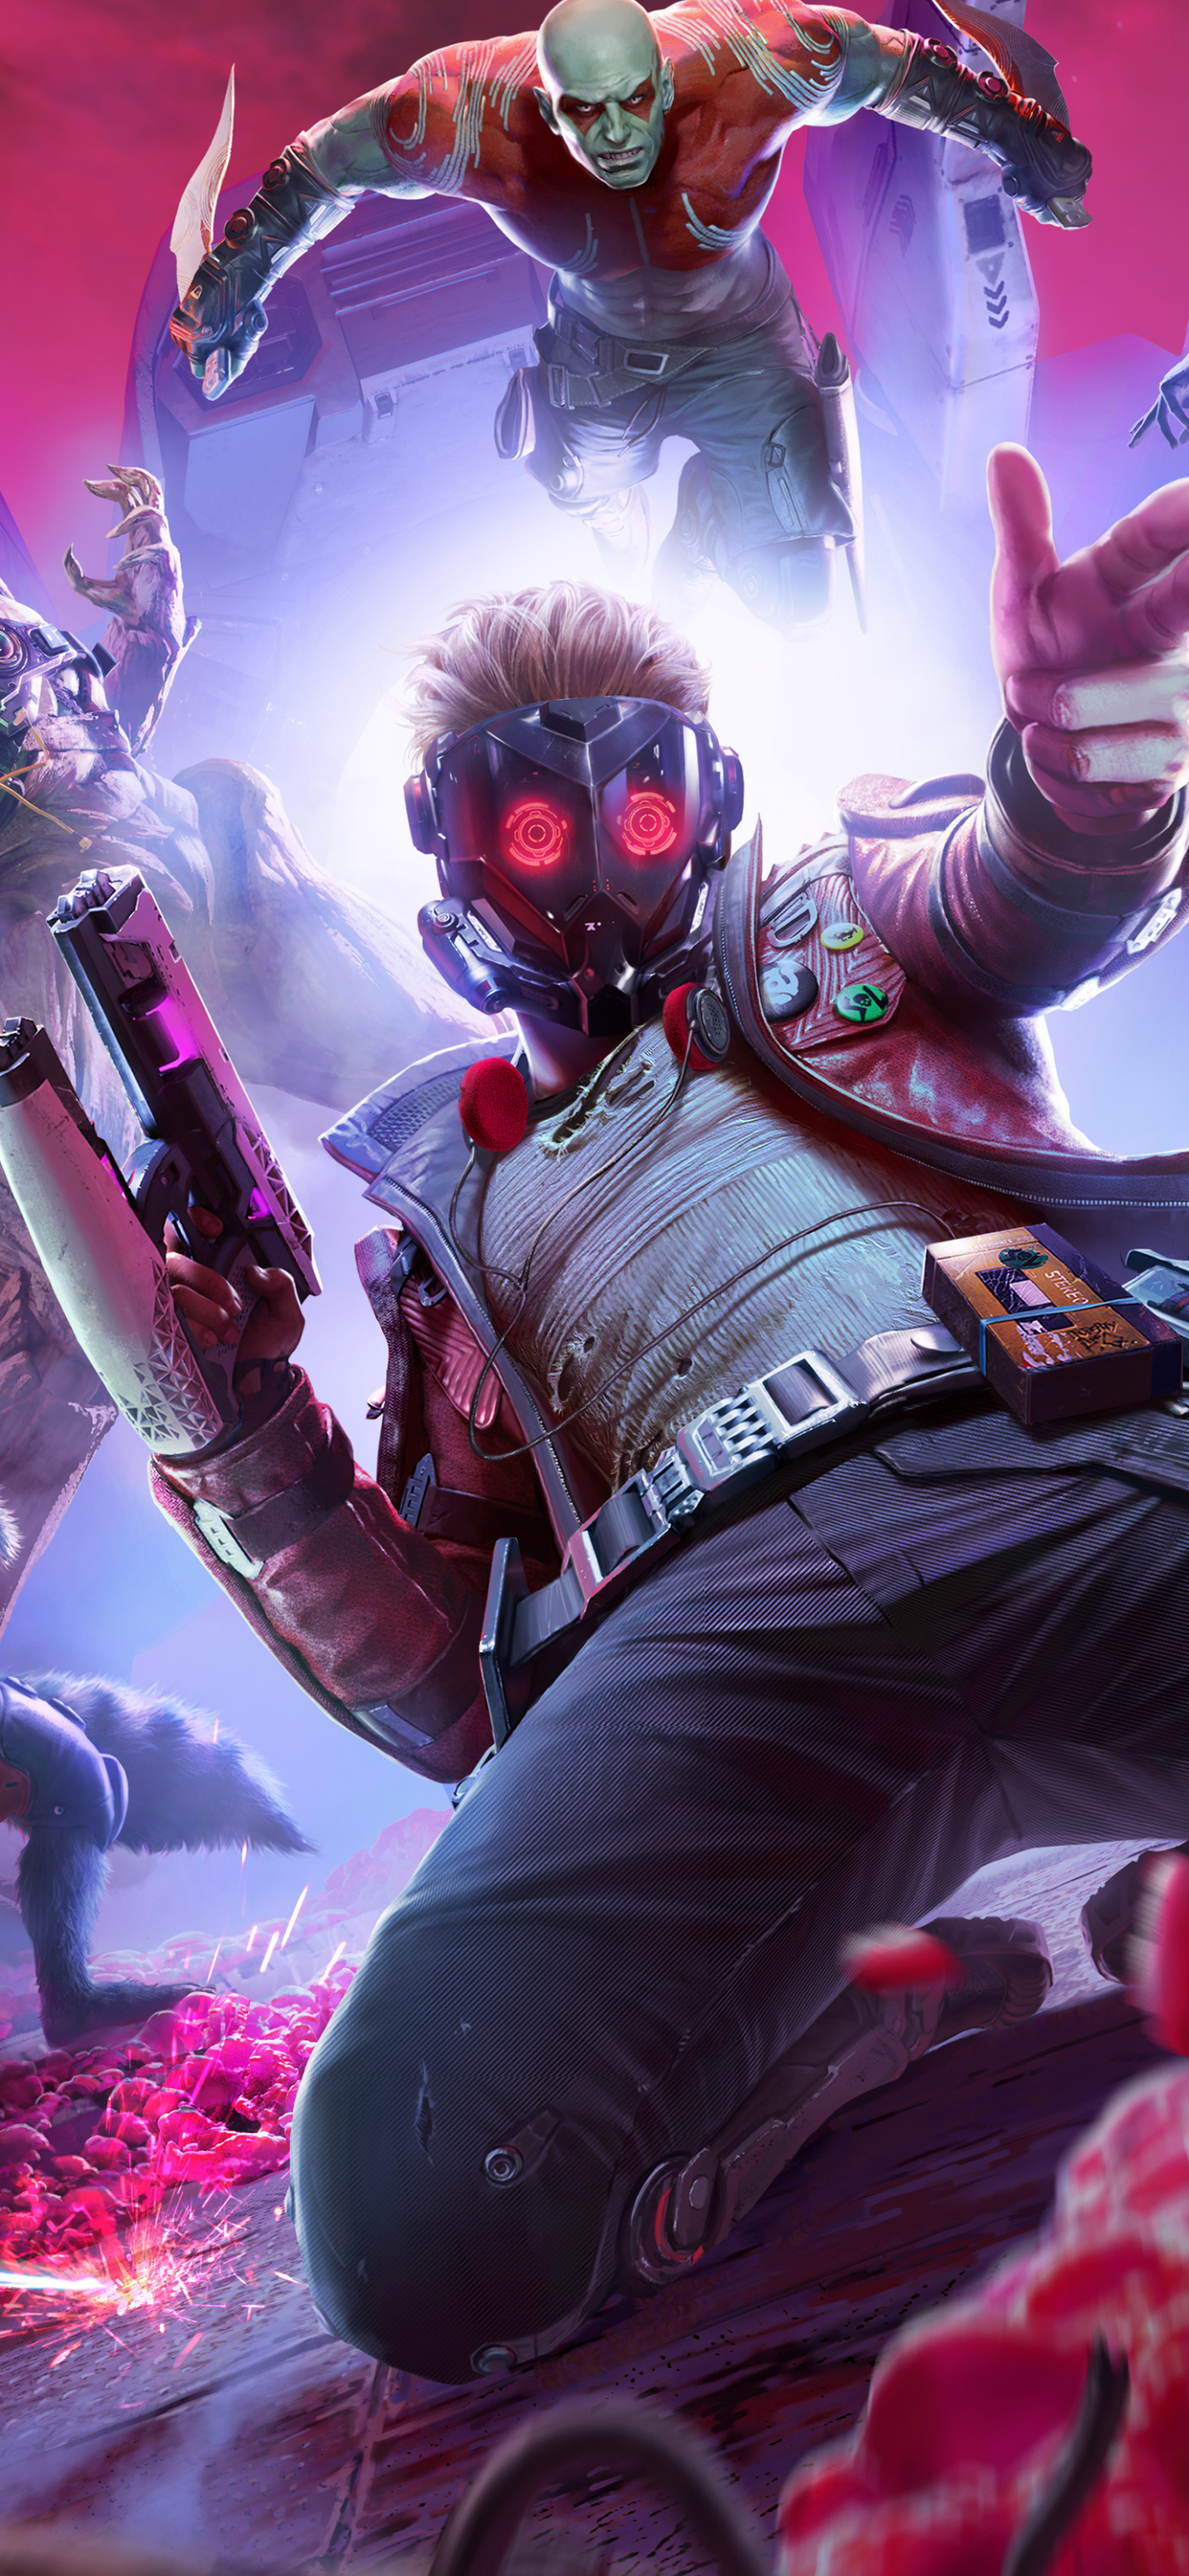 video game, marvel's guardians of the galaxy, drax the destroyer, star lord, peter quill